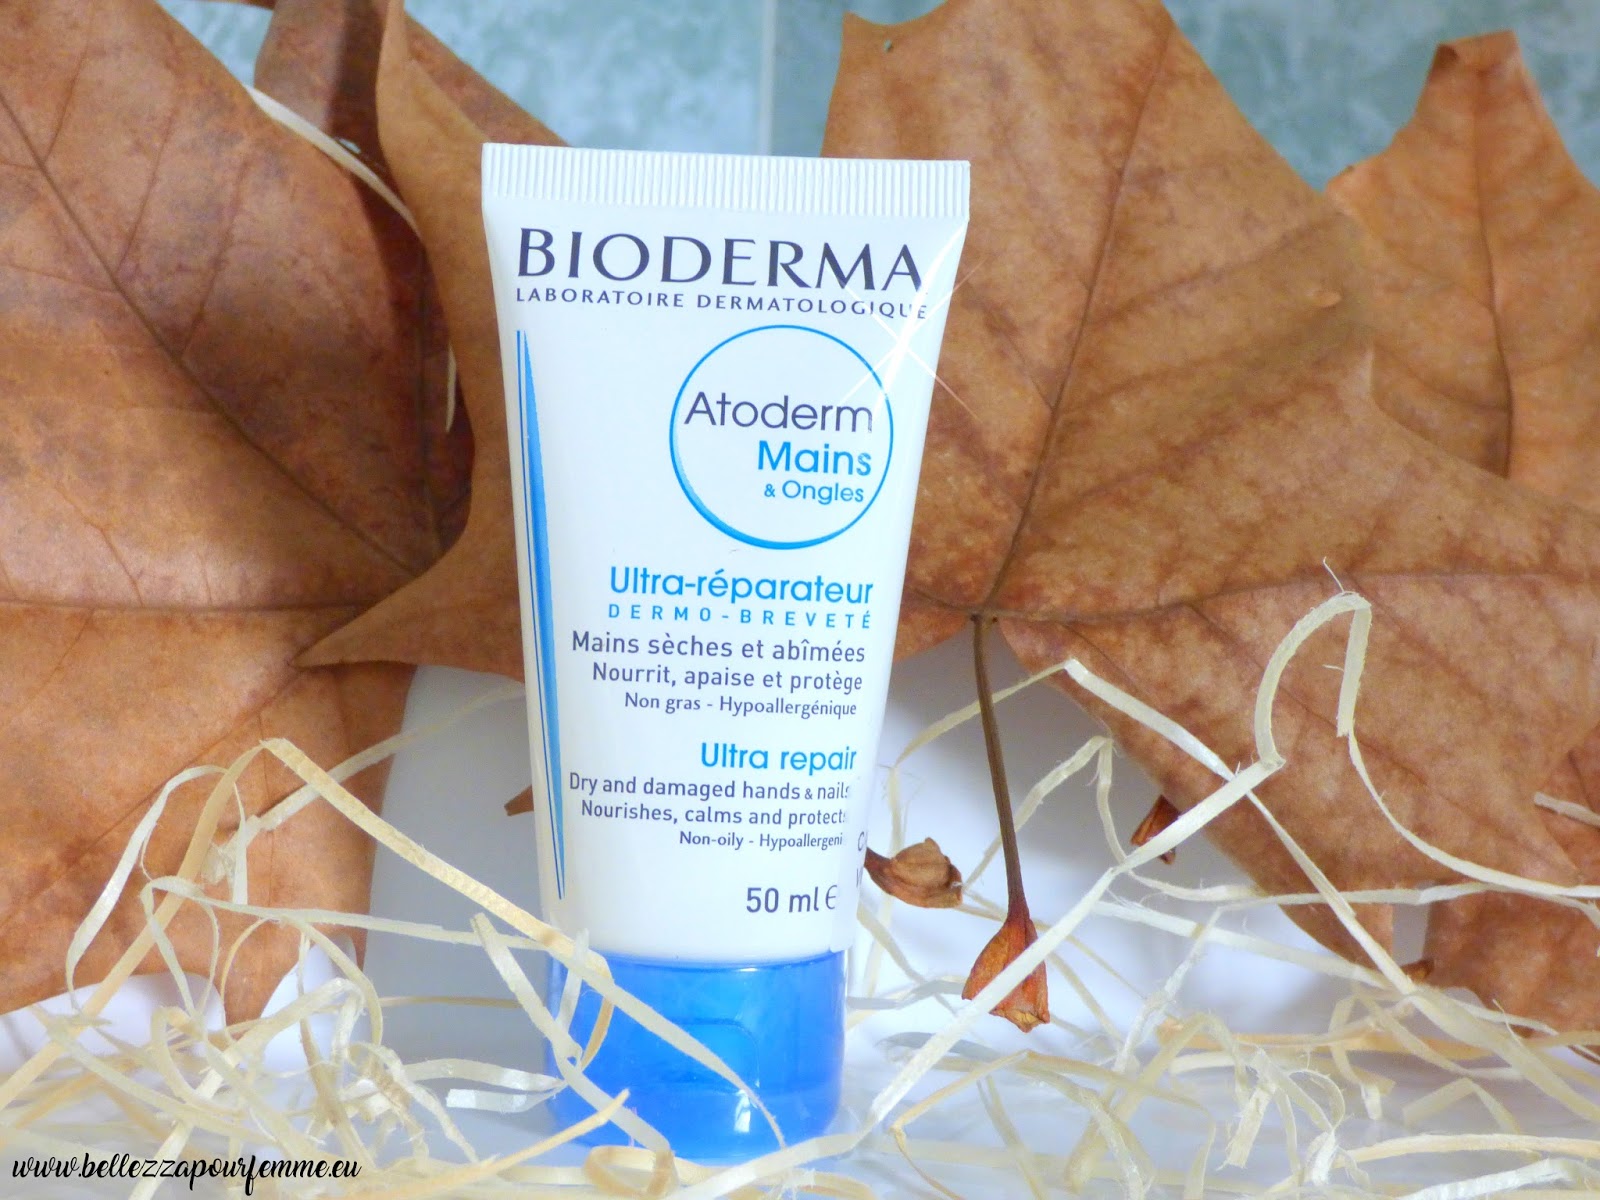 Atoderm Mains & Ongles recensione